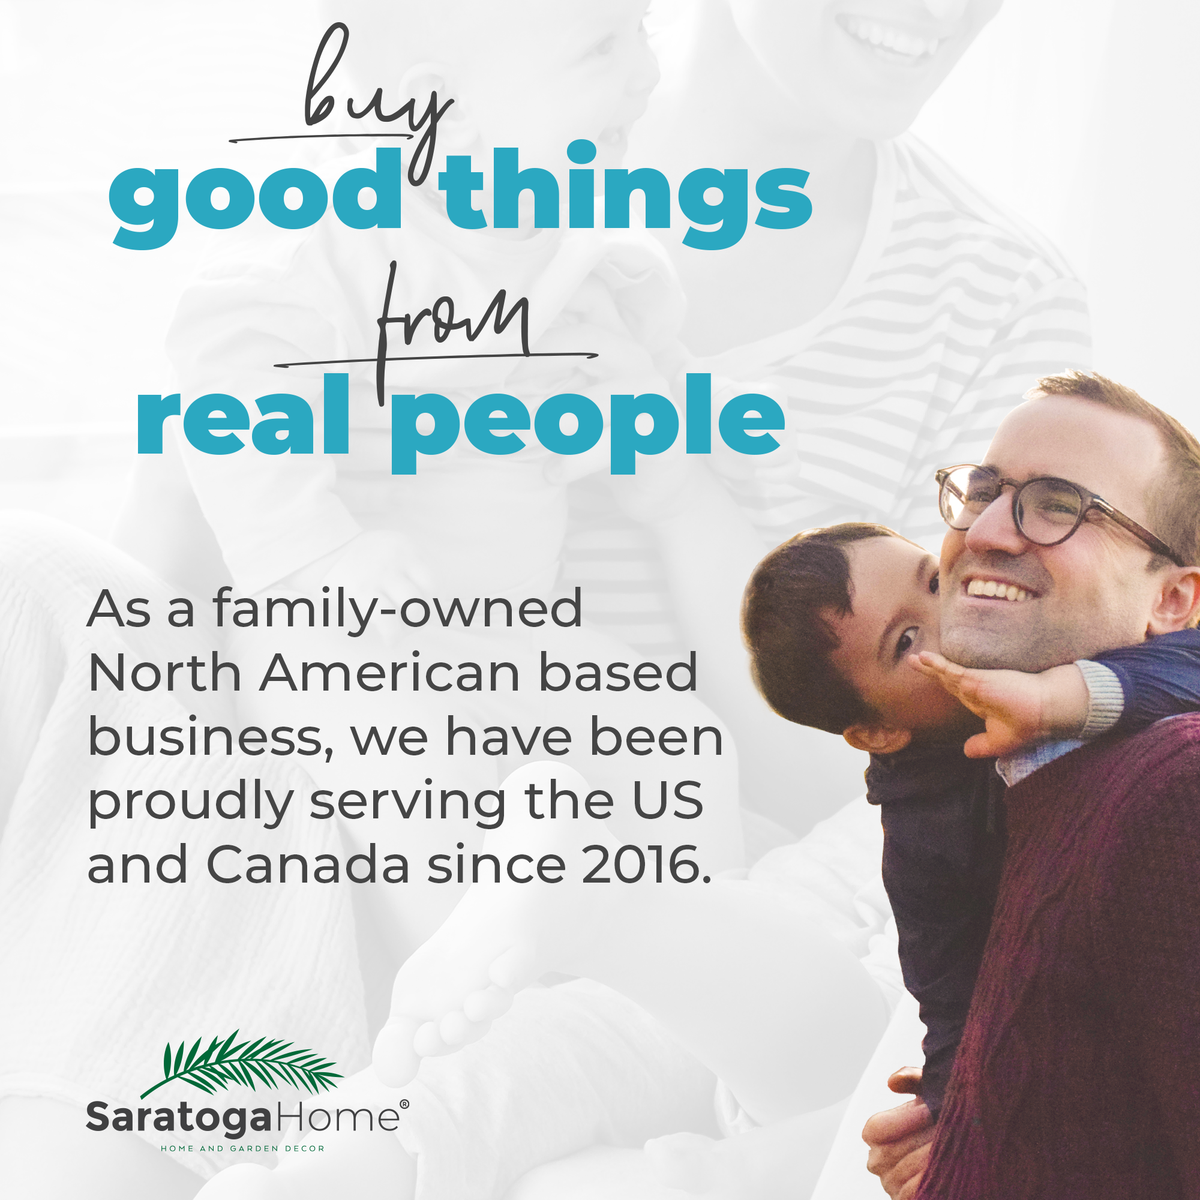 We are proud to be a family-owned North American based business. Saratoga Home is committed to providing exceptional customer service since 2016